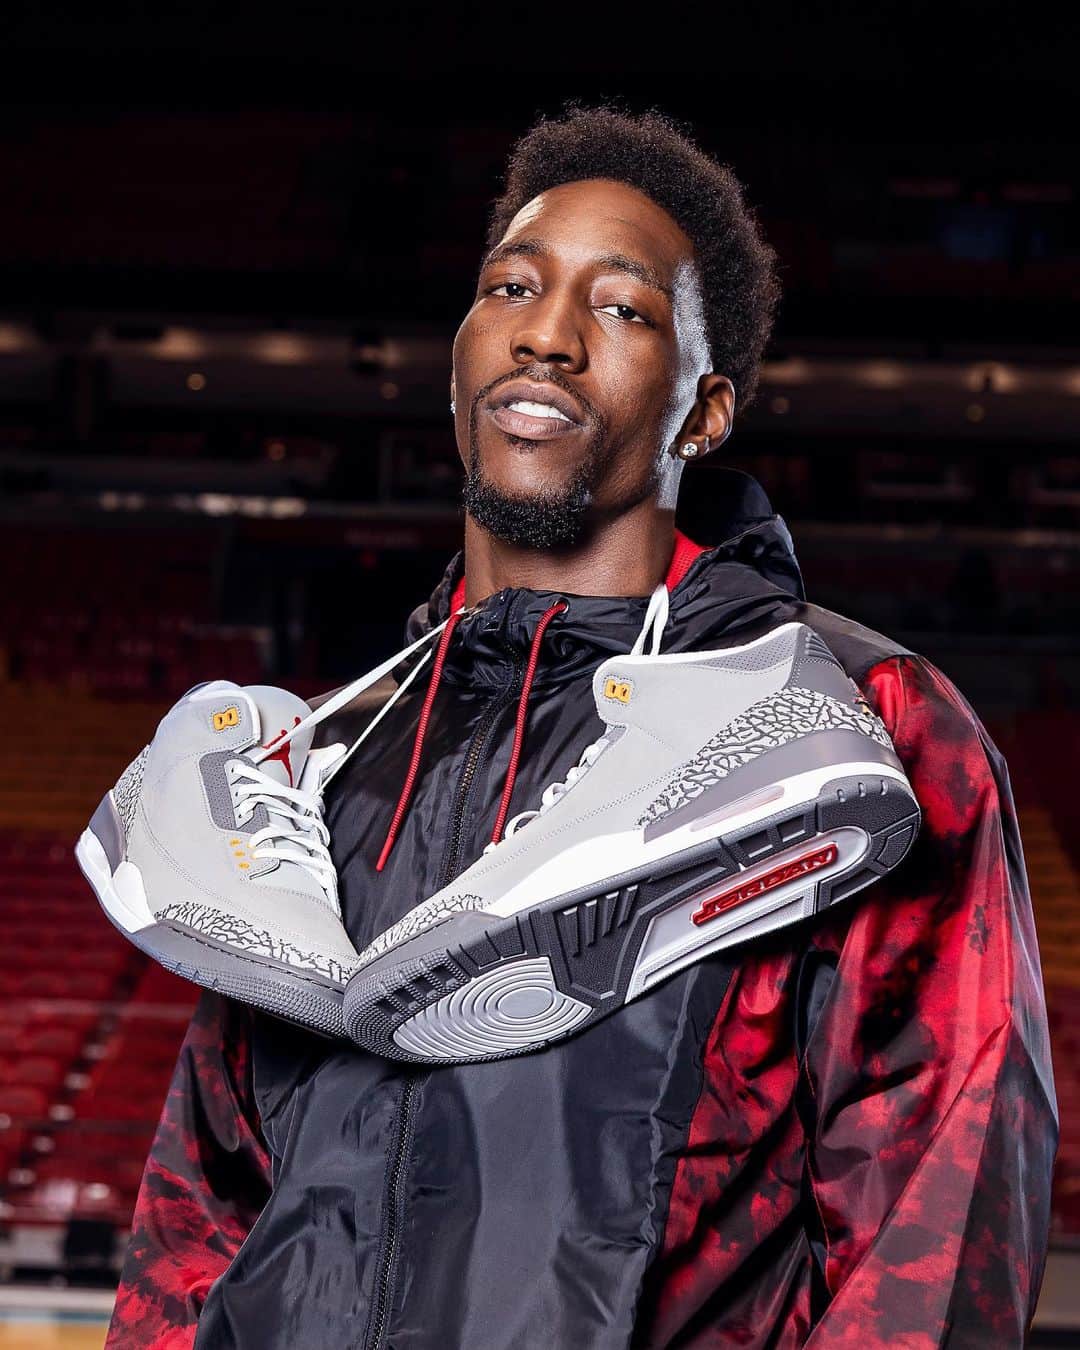 Jordanのインスタグラム：「“Being able to say that I’m part of the brand makes me sit back and really cherish everything.”   Jordan Brand is pleased to welcome @bam1of1 to the Jumpman Family.   Learn more about Bam’s journey to the Jordan Brand and his commitment to giving back at the link in our bio.」